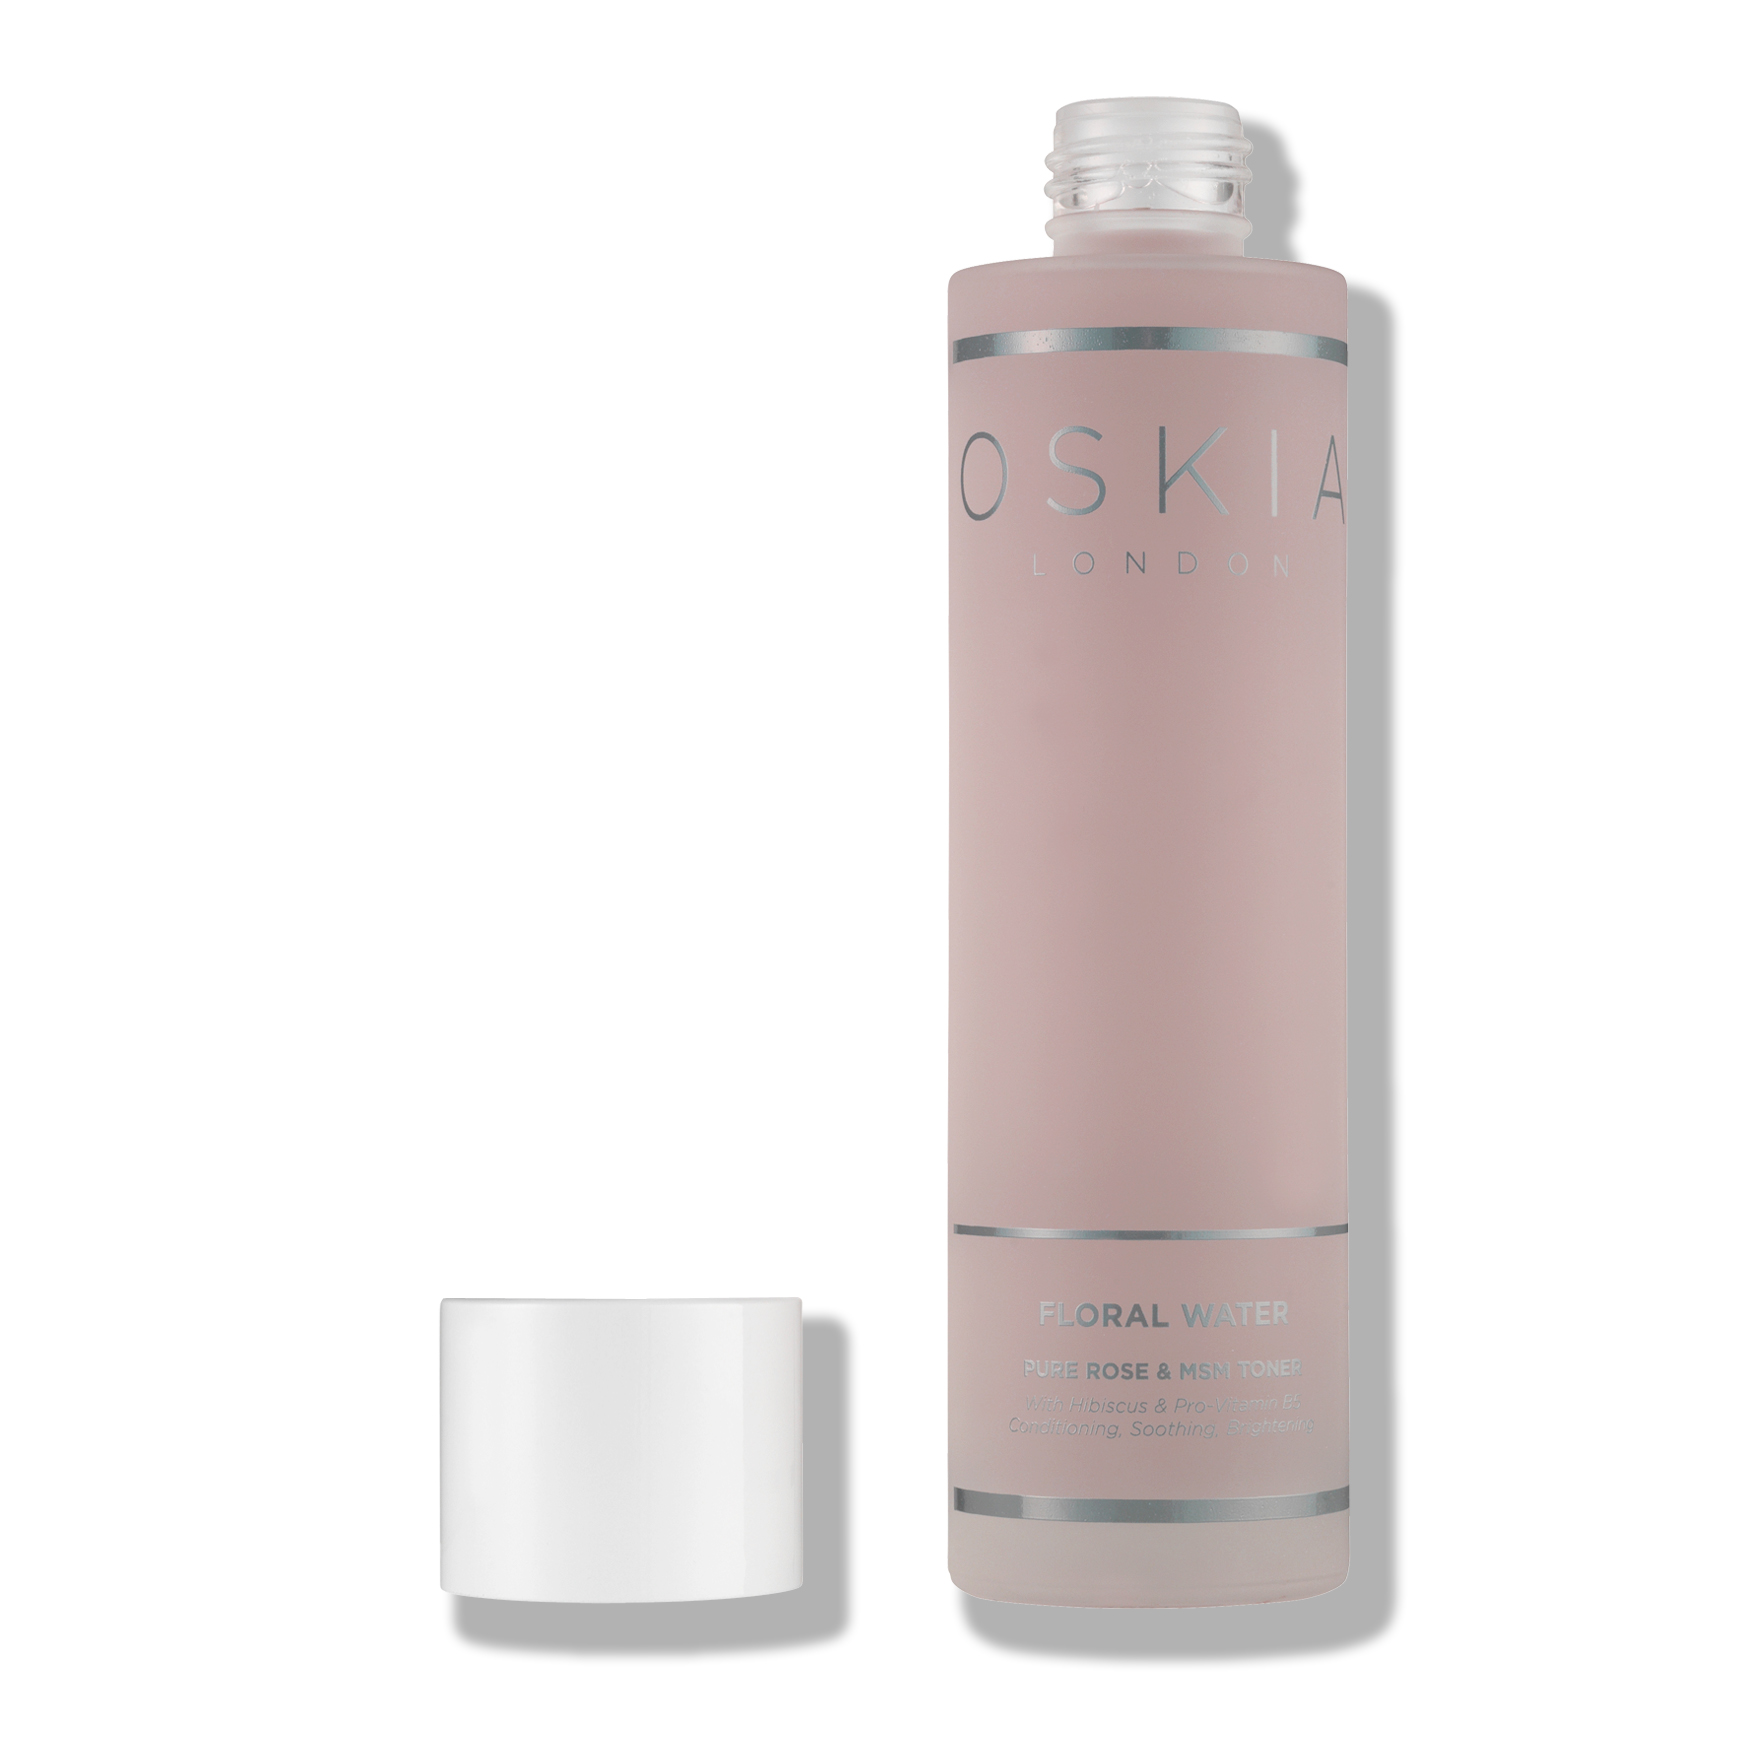 Oskia Floral Water Toner | Space NK